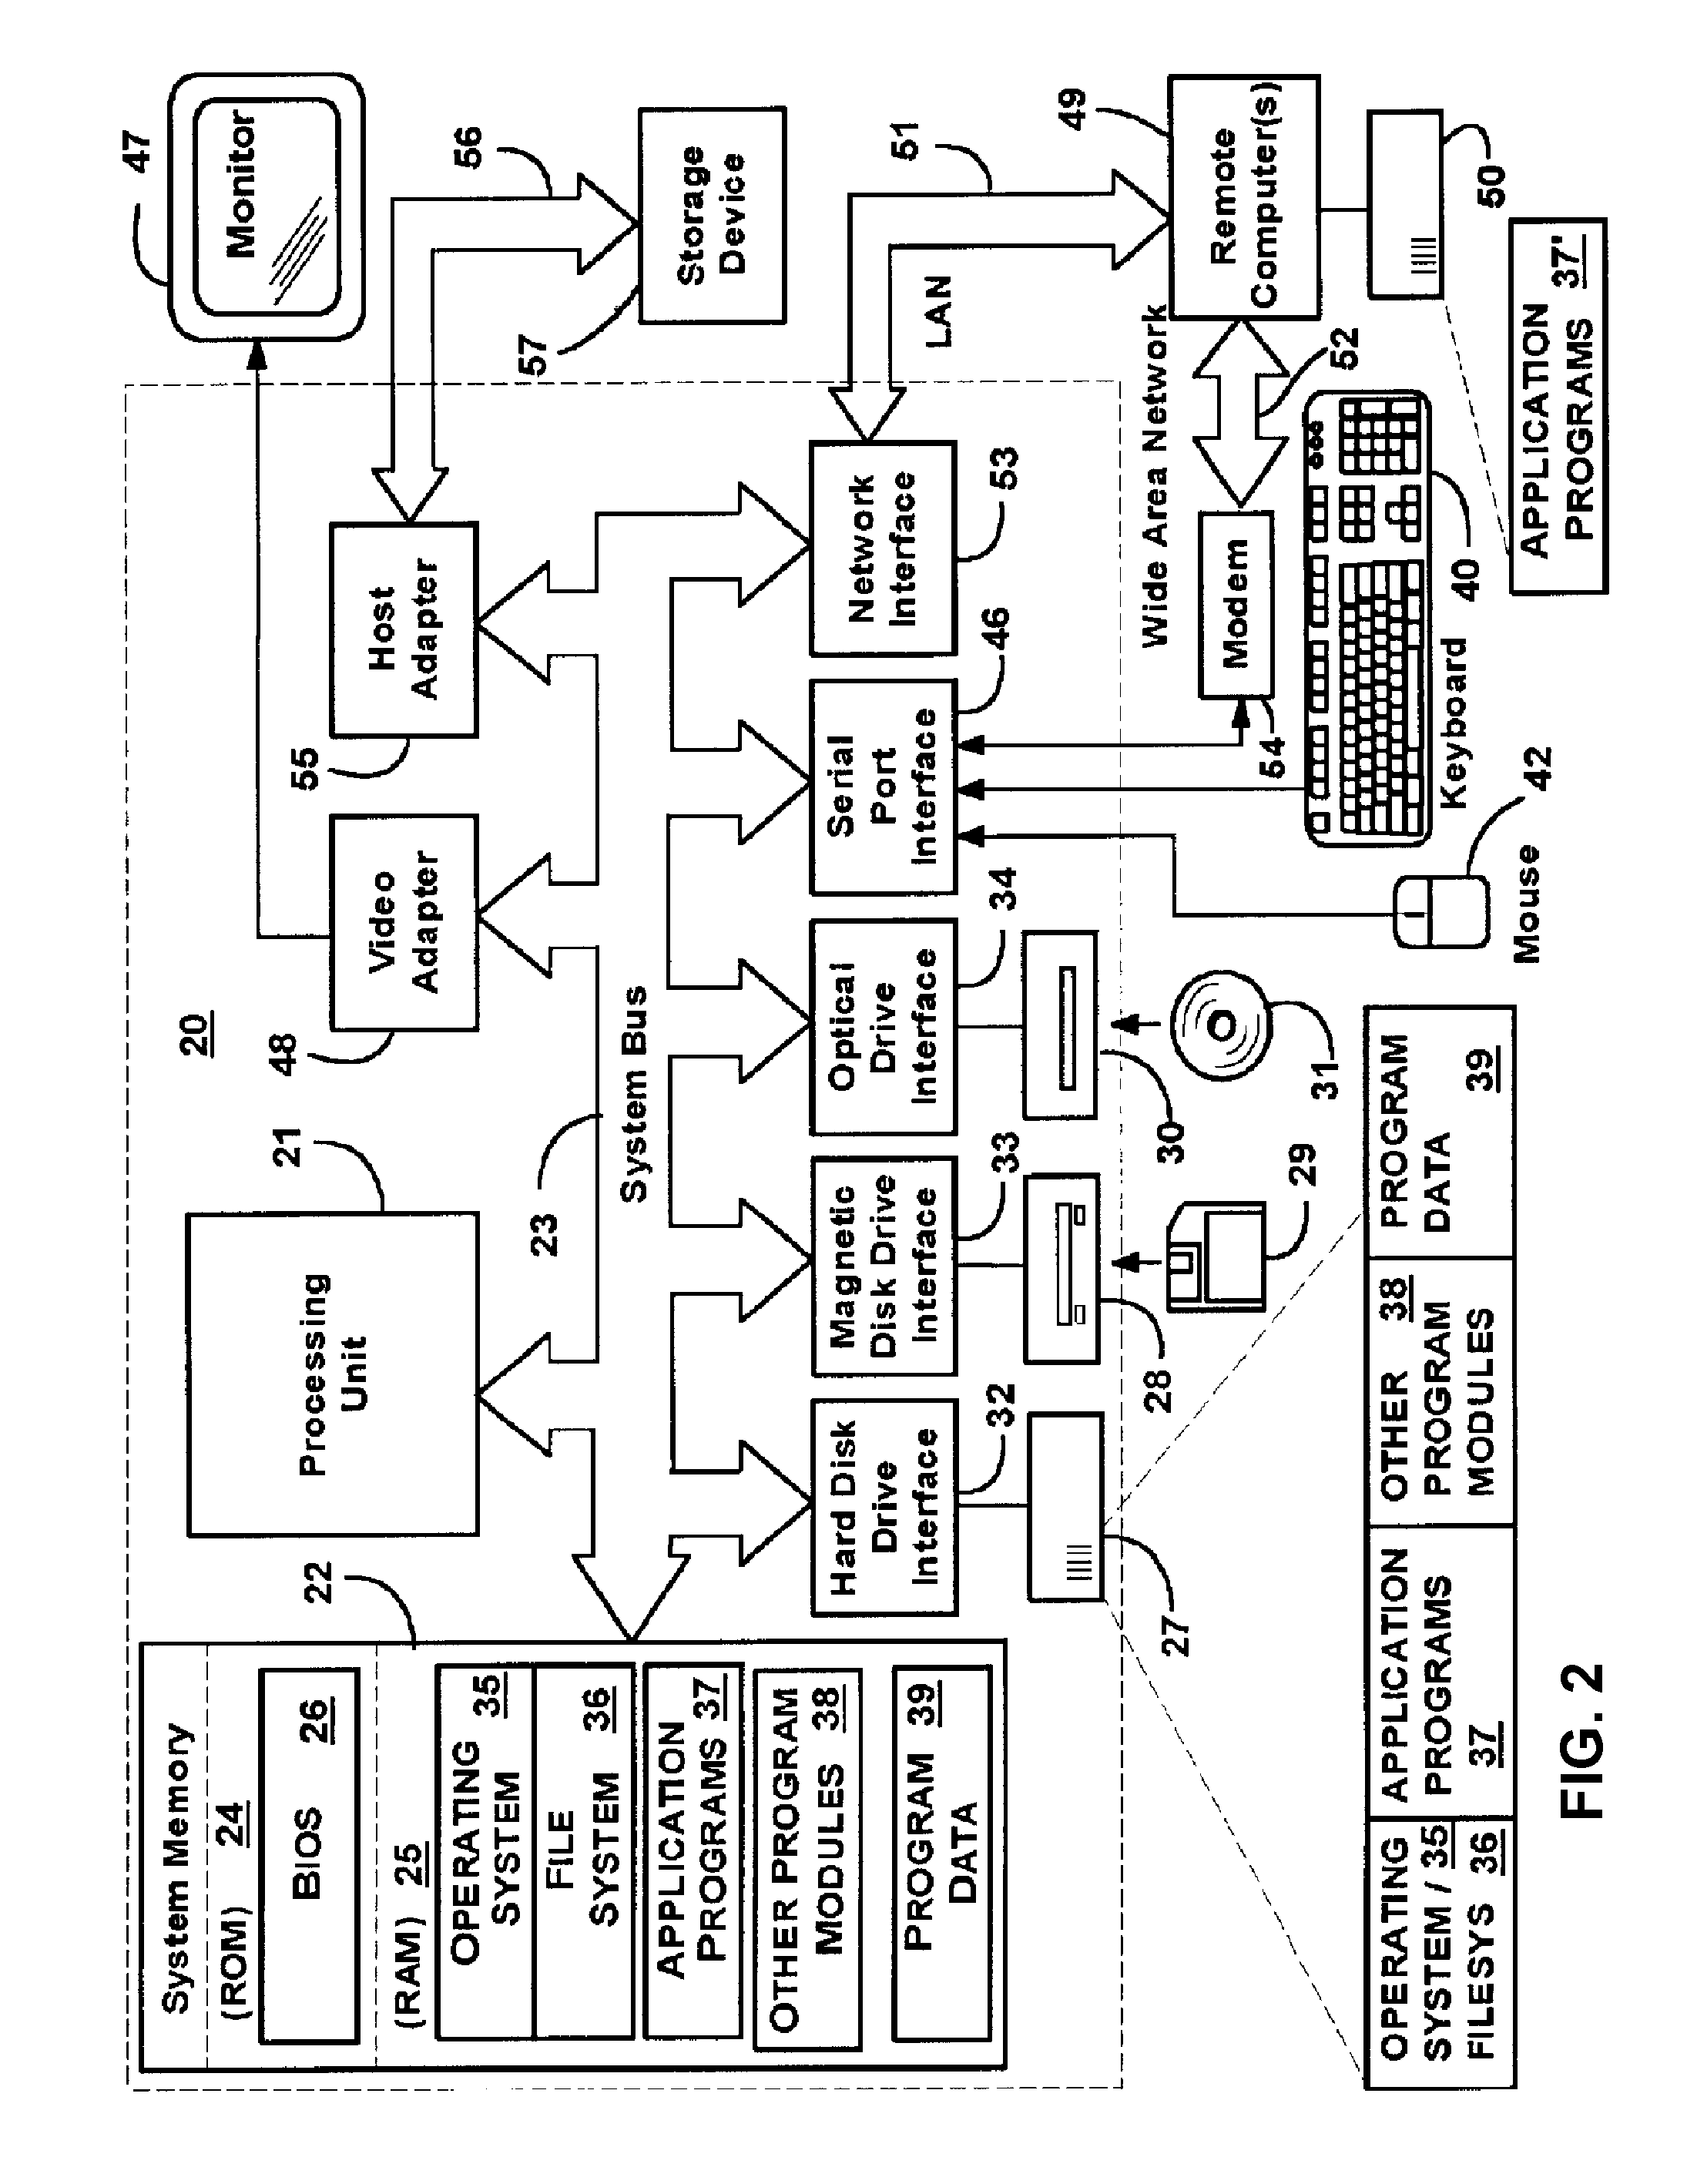 Virtualization system with hypervisor embedded in bios or using extensible firmware interface